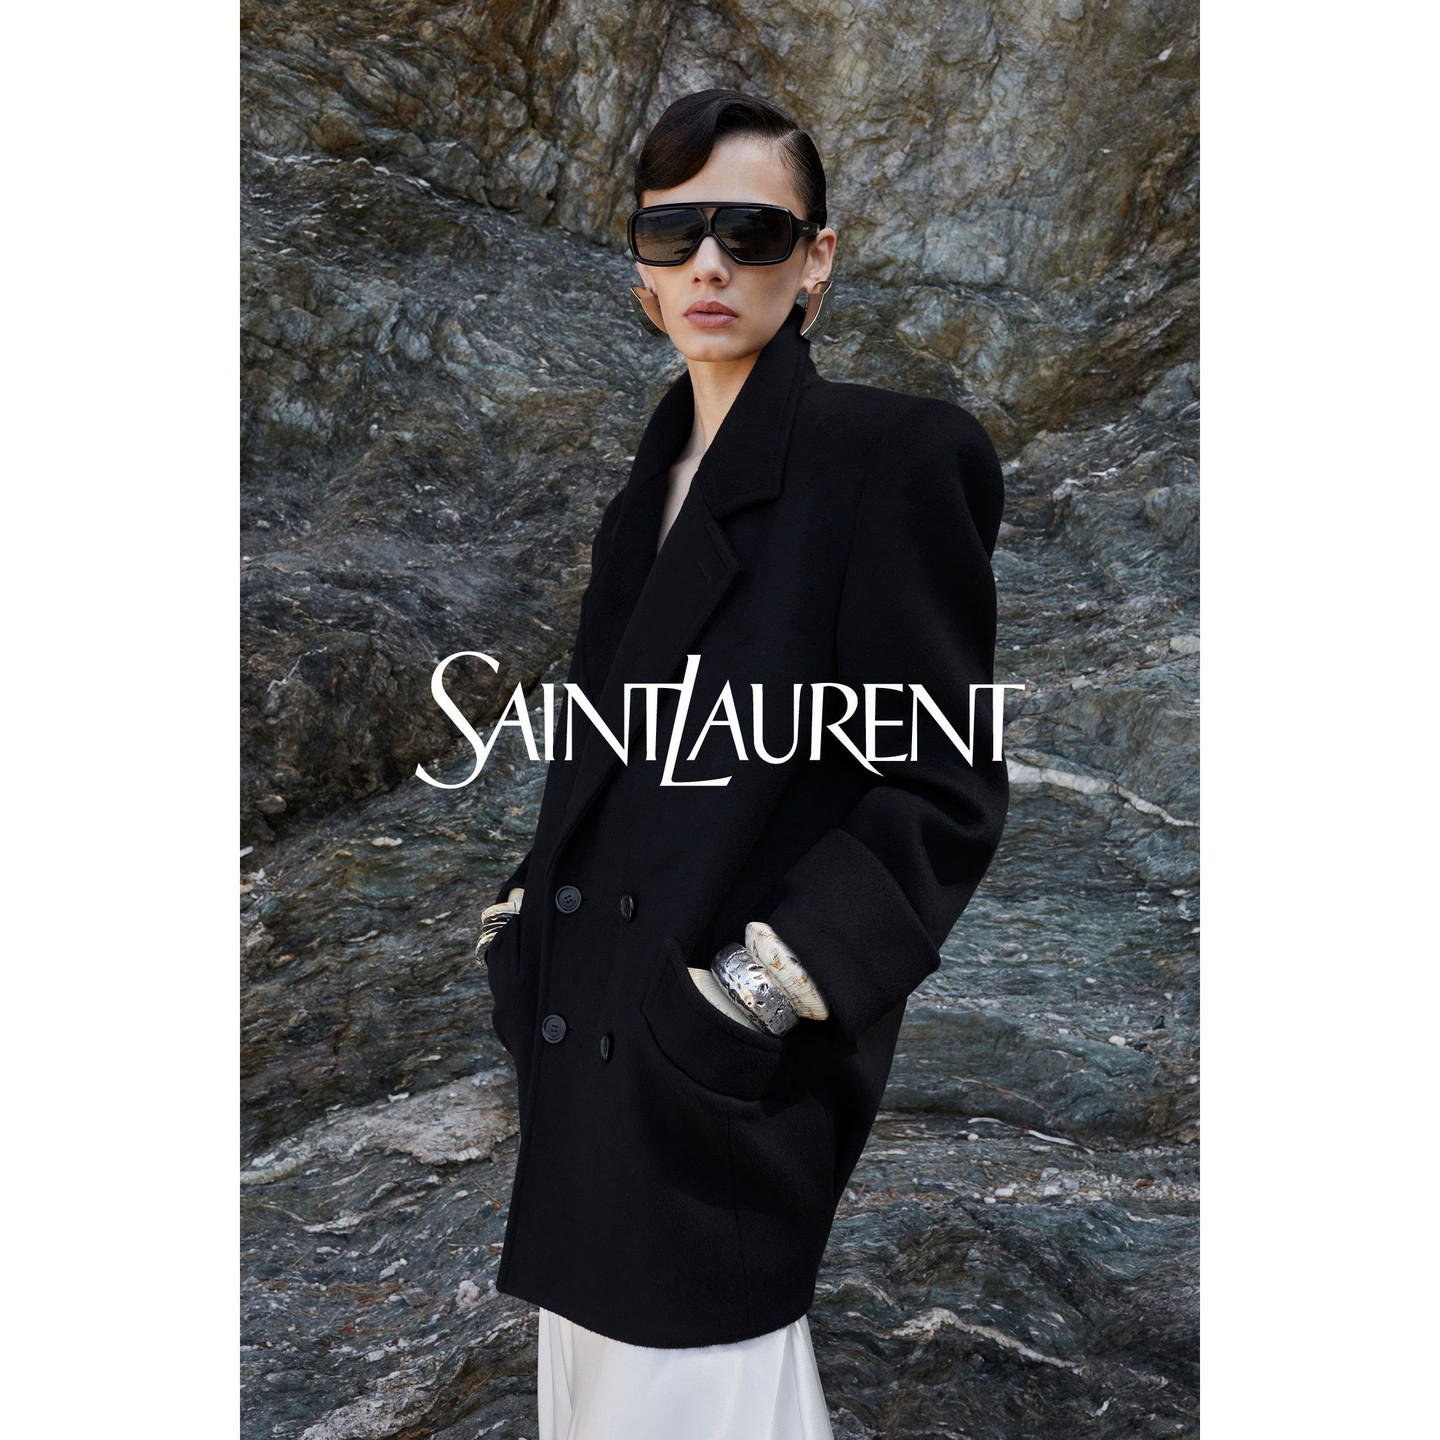 image  1 SAINT LAURENT - Sihana - Winter 22⁣by Anthony Vaccarello⁣⁣Photographed by Juergen Teller⁣⁣⁣#YSL #Sai